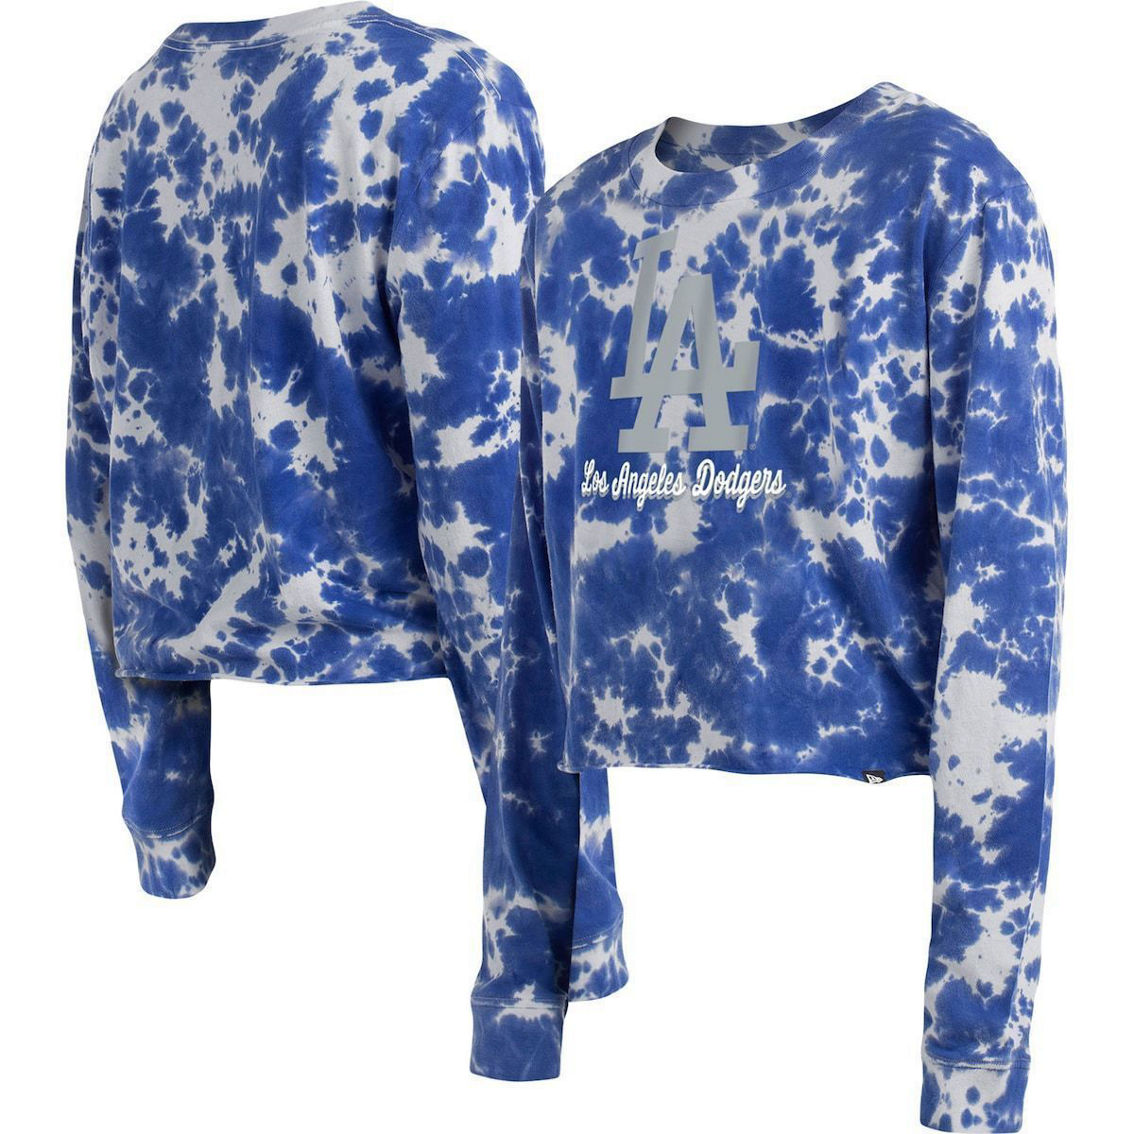 New Era Women's Royal Los Angeles Dodgers Tie-Dye Cropped Long Sleeve T-Shirt - Image 2 of 4